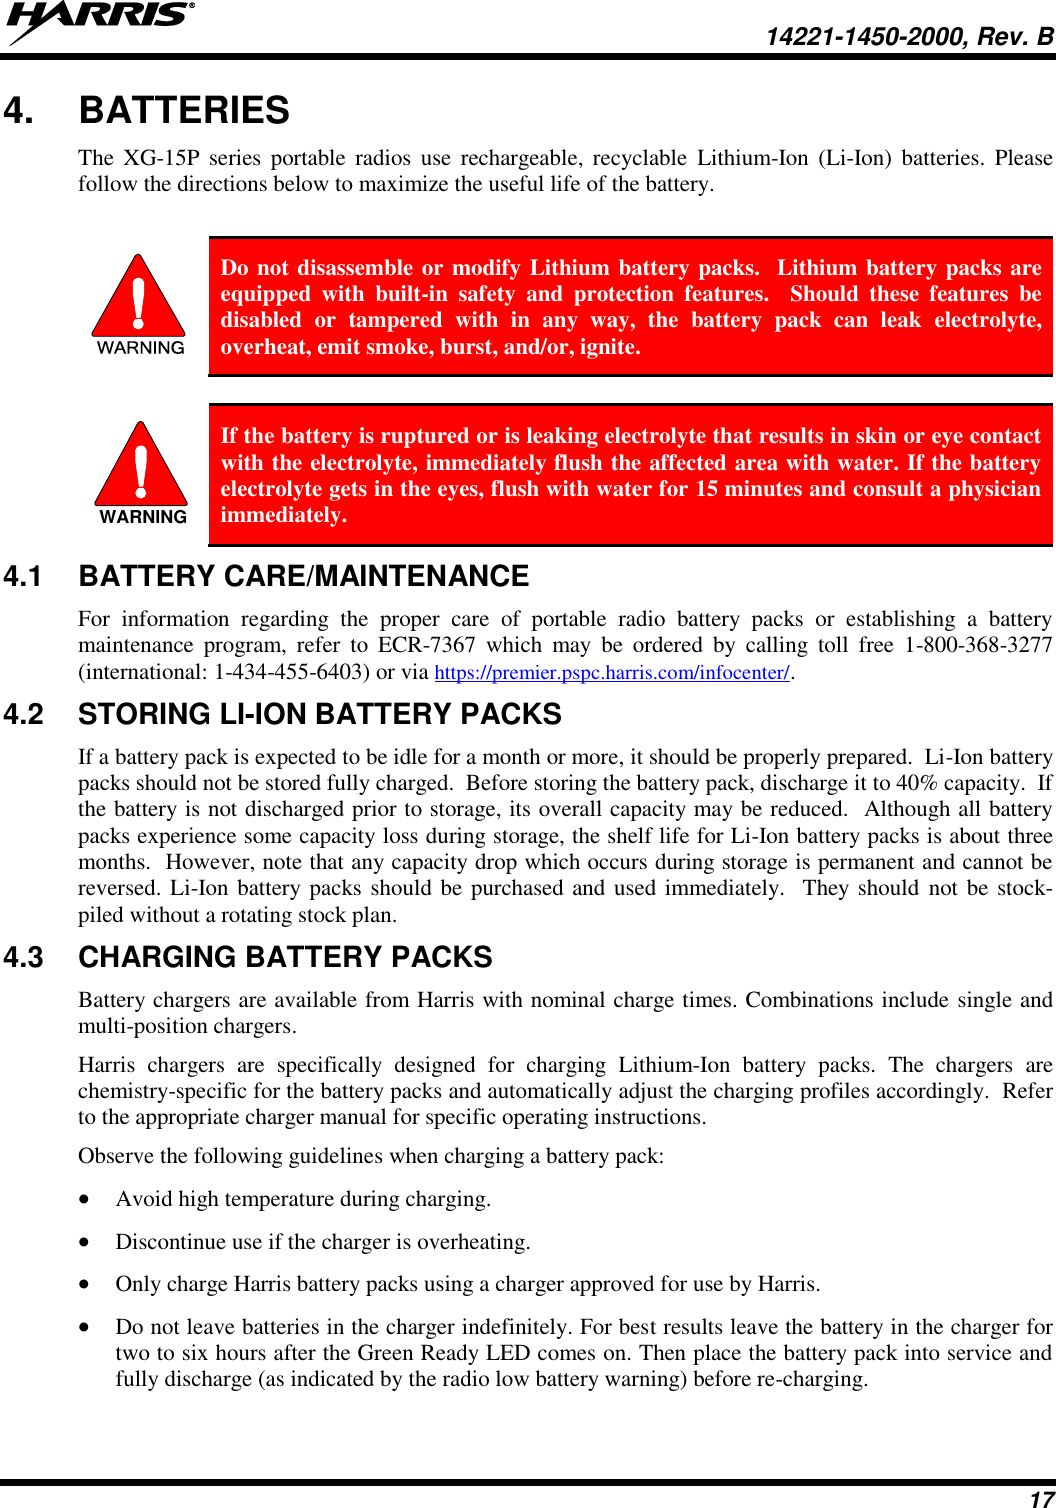   14221-1450-2000, Rev. B 17 4.  BATTERIES The  XG-15P  series  portable  radios  use  rechargeable, recyclable  Lithium-Ion  (Li-Ion)  batteries.  Please follow the directions below to maximize the useful life of the battery.  WARNING Do not disassemble or modify Lithium battery packs.  Lithium battery packs are equipped  with  built-in  safety  and  protection  features.    Should  these  features  be disabled  or  tampered  with  in  any  way,  the  battery  pack  can  leak  electrolyte, overheat, emit smoke, burst, and/or, ignite.   If the battery is ruptured or is leaking electrolyte that results in skin or eye contact with the electrolyte, immediately flush the affected area with water. If the battery electrolyte gets in the eyes, flush with water for 15 minutes and consult a physician immediately. 4.1  BATTERY CARE/MAINTENANCE For  information  regarding  the  proper  care  of  portable  radio  battery  packs  or  establishing  a  battery maintenance  program,  refer  to  ECR-7367  which  may  be  ordered  by  calling  toll  free  1-800-368-3277 (international: 1-434-455-6403) or via https://premier.pspc.harris.com/infocenter/. 4.2  STORING LI-ION BATTERY PACKS If a battery pack is expected to be idle for a month or more, it should be properly prepared.  Li-Ion battery packs should not be stored fully charged.  Before storing the battery pack, discharge it to 40% capacity.  If the battery is not discharged prior to storage, its overall capacity may be reduced.  Although all battery packs experience some capacity loss during storage, the shelf life for Li-Ion battery packs is about three months.  However, note that any capacity drop which occurs during storage is permanent and cannot be reversed. Li-Ion battery packs should be purchased and used immediately.  They should  not be stock-piled without a rotating stock plan.  4.3  CHARGING BATTERY PACKS Battery chargers are available from Harris with nominal charge times. Combinations include single and multi-position chargers.  Harris  chargers  are  specifically  designed  for  charging  Lithium-Ion  battery  packs.  The  chargers  are chemistry-specific for the battery packs and automatically adjust the charging profiles accordingly.  Refer to the appropriate charger manual for specific operating instructions.  Observe the following guidelines when charging a battery pack:  Avoid high temperature during charging.   Discontinue use if the charger is overheating.  Only charge Harris battery packs using a charger approved for use by Harris.  Do not leave batteries in the charger indefinitely. For best results leave the battery in the charger for two to six hours after the Green Ready LED comes on. Then place the battery pack into service and fully discharge (as indicated by the radio low battery warning) before re-charging. WARNING